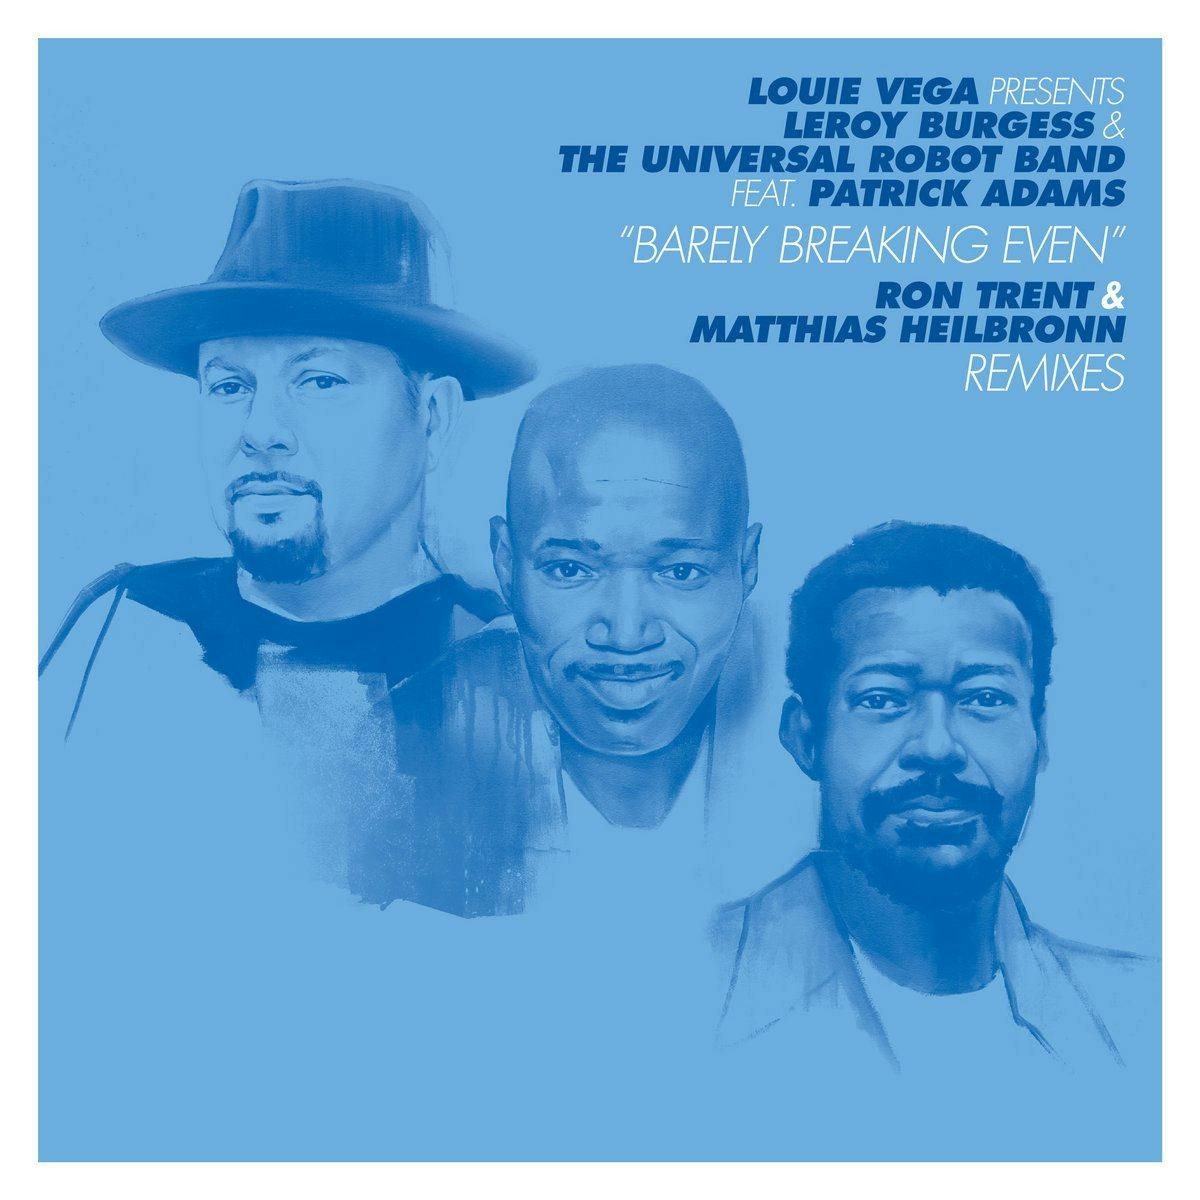 Following up BBE Music’s special version of Universal Robot Band’s ‘Barely Breaking Even‘ by Louie Vega, Leroy Burgess and Patrick Adams, the label announces new remixes by Ron Trent and Matthias Heilbronn.